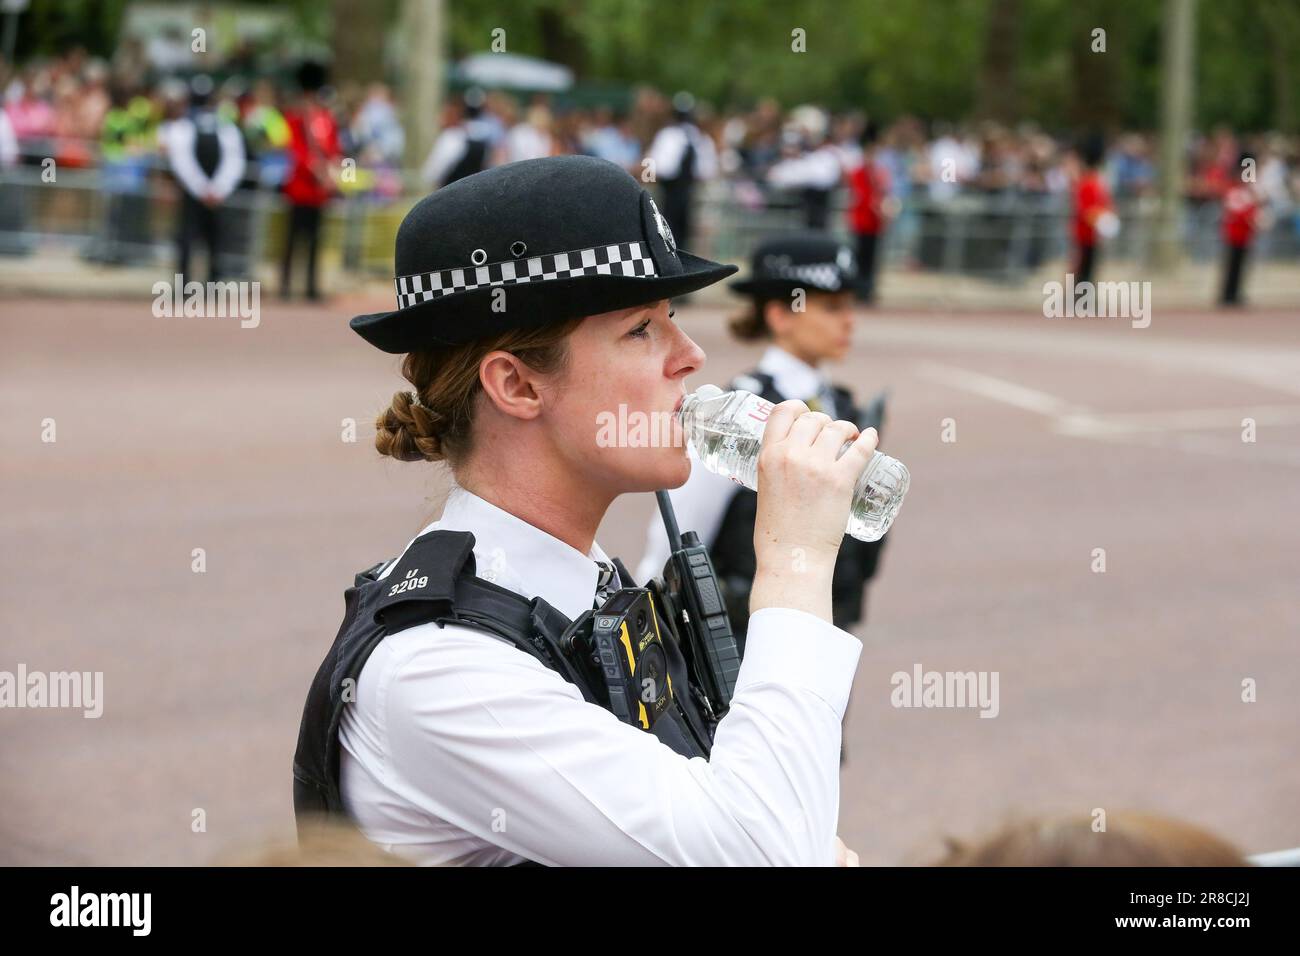 London, UK. 17th June, 2023. A police officer drinks water during hot weather in London at the Trooping the Colour parade. The parade is held to mark the official birthday of King Charles III. This year will be the first Trooping the Colour held for King Charles III since he ascended to the throne following the death of Queen Elizabeth II on 8 September 2022. (Photo by Steve Taylor/SOPA Images/Sipa USA) Credit: Sipa USA/Alamy Live News Stock Photo